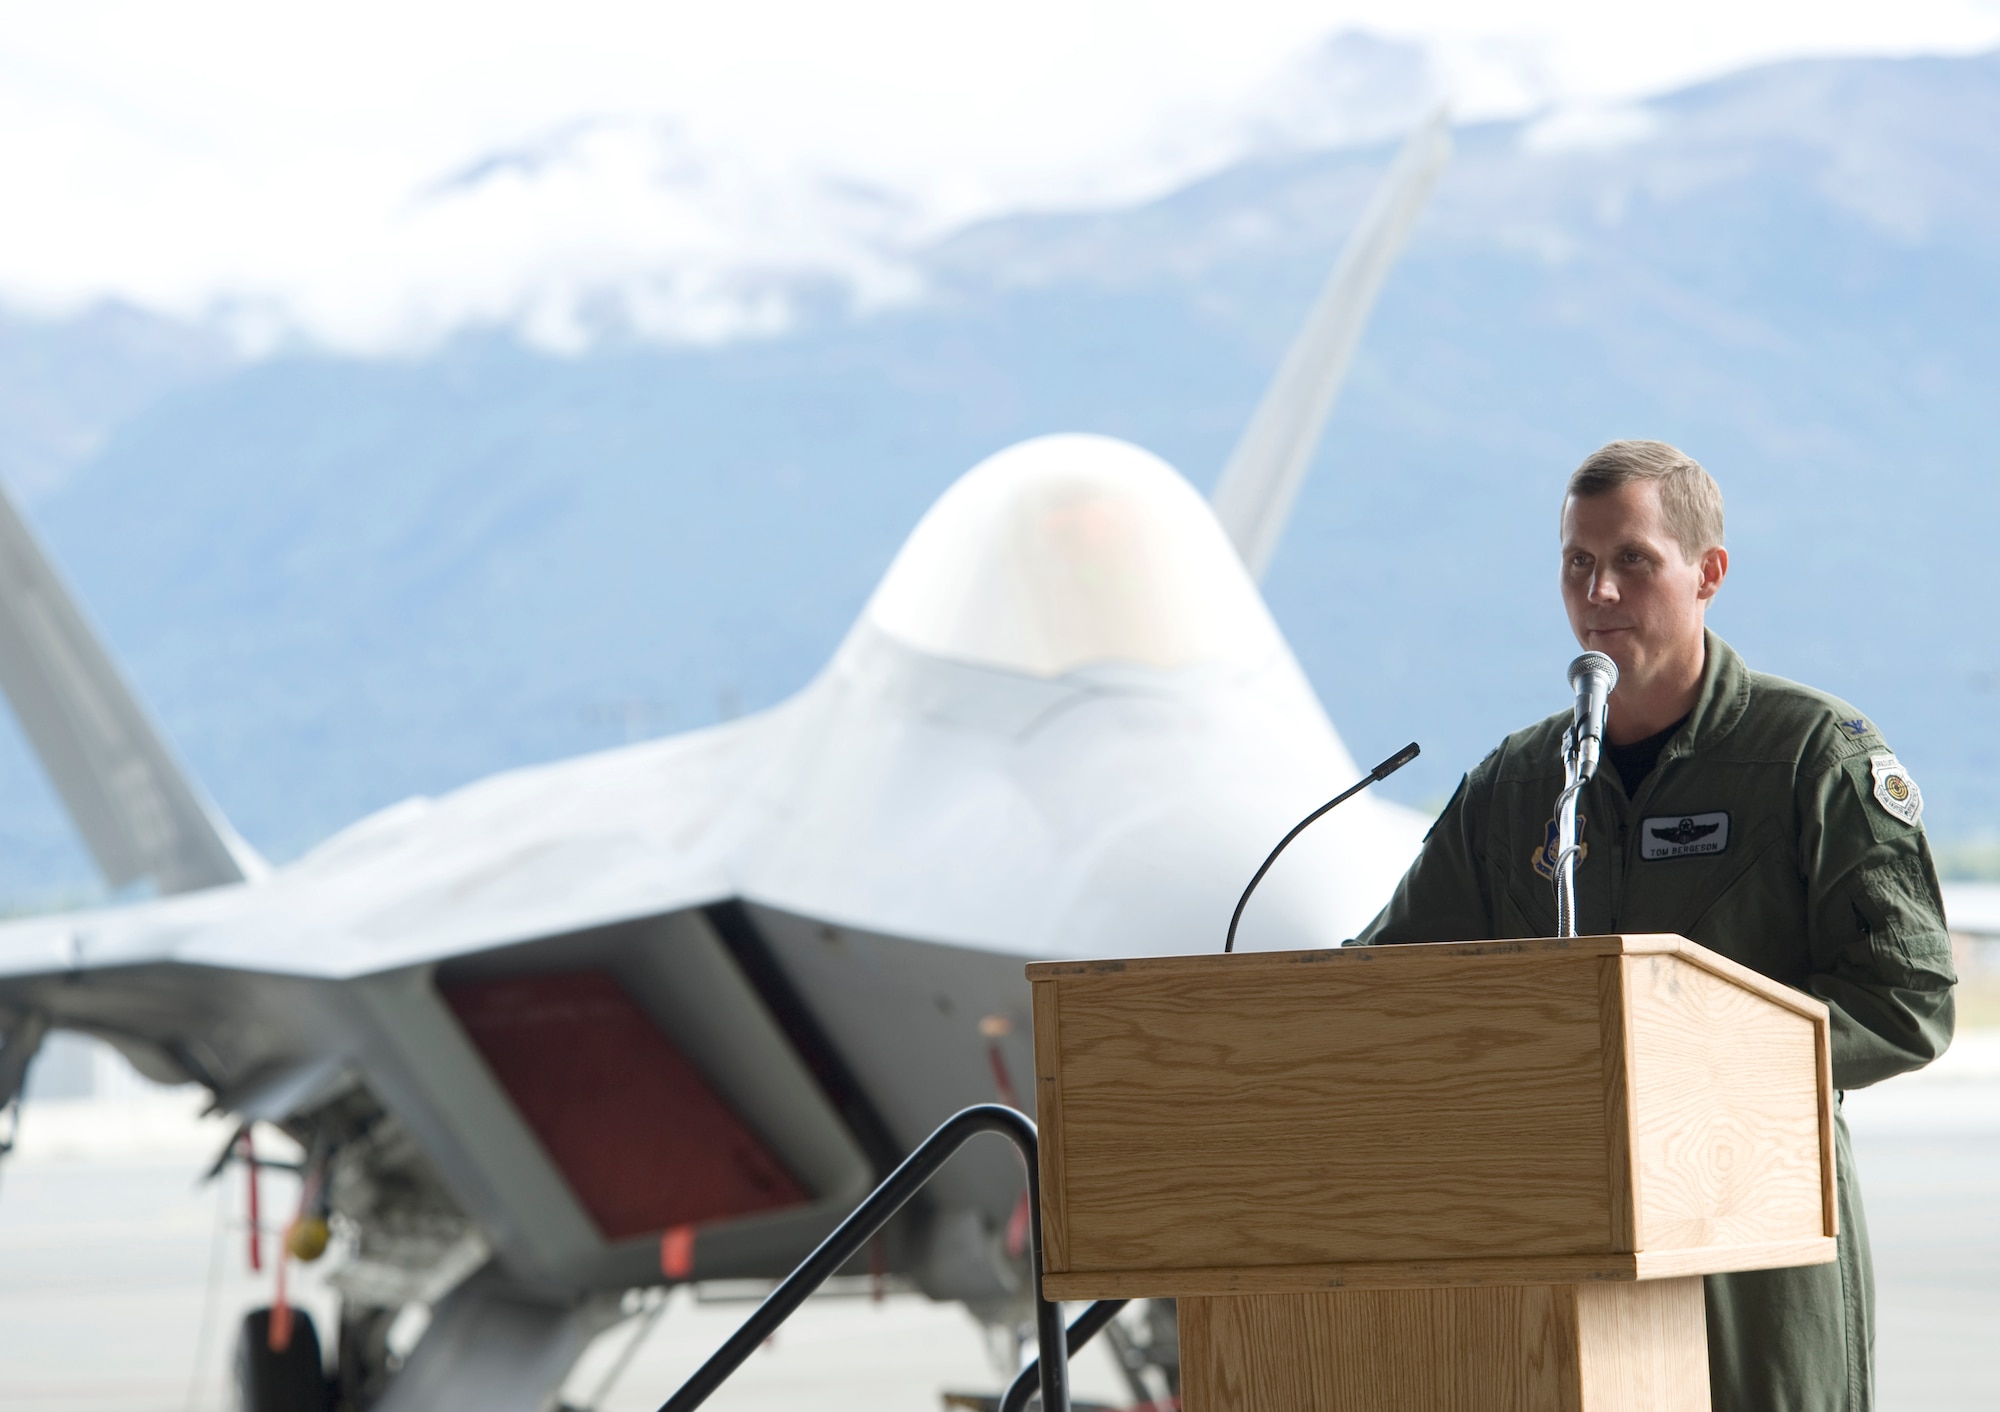 ELMENDORF AIR FORCE BASE, Alaska -- Col. Thomas Bergeson, 3rd Wing commander, speaks to the attendants of the Initial Operational Capability ceremony Sept. 5. The ceremony was held to celebrate the combat capability of the C-17 Globemaster III and the F-22A Raptor. (U.S. Air Force photo/Senior Airman Matthew Owens)